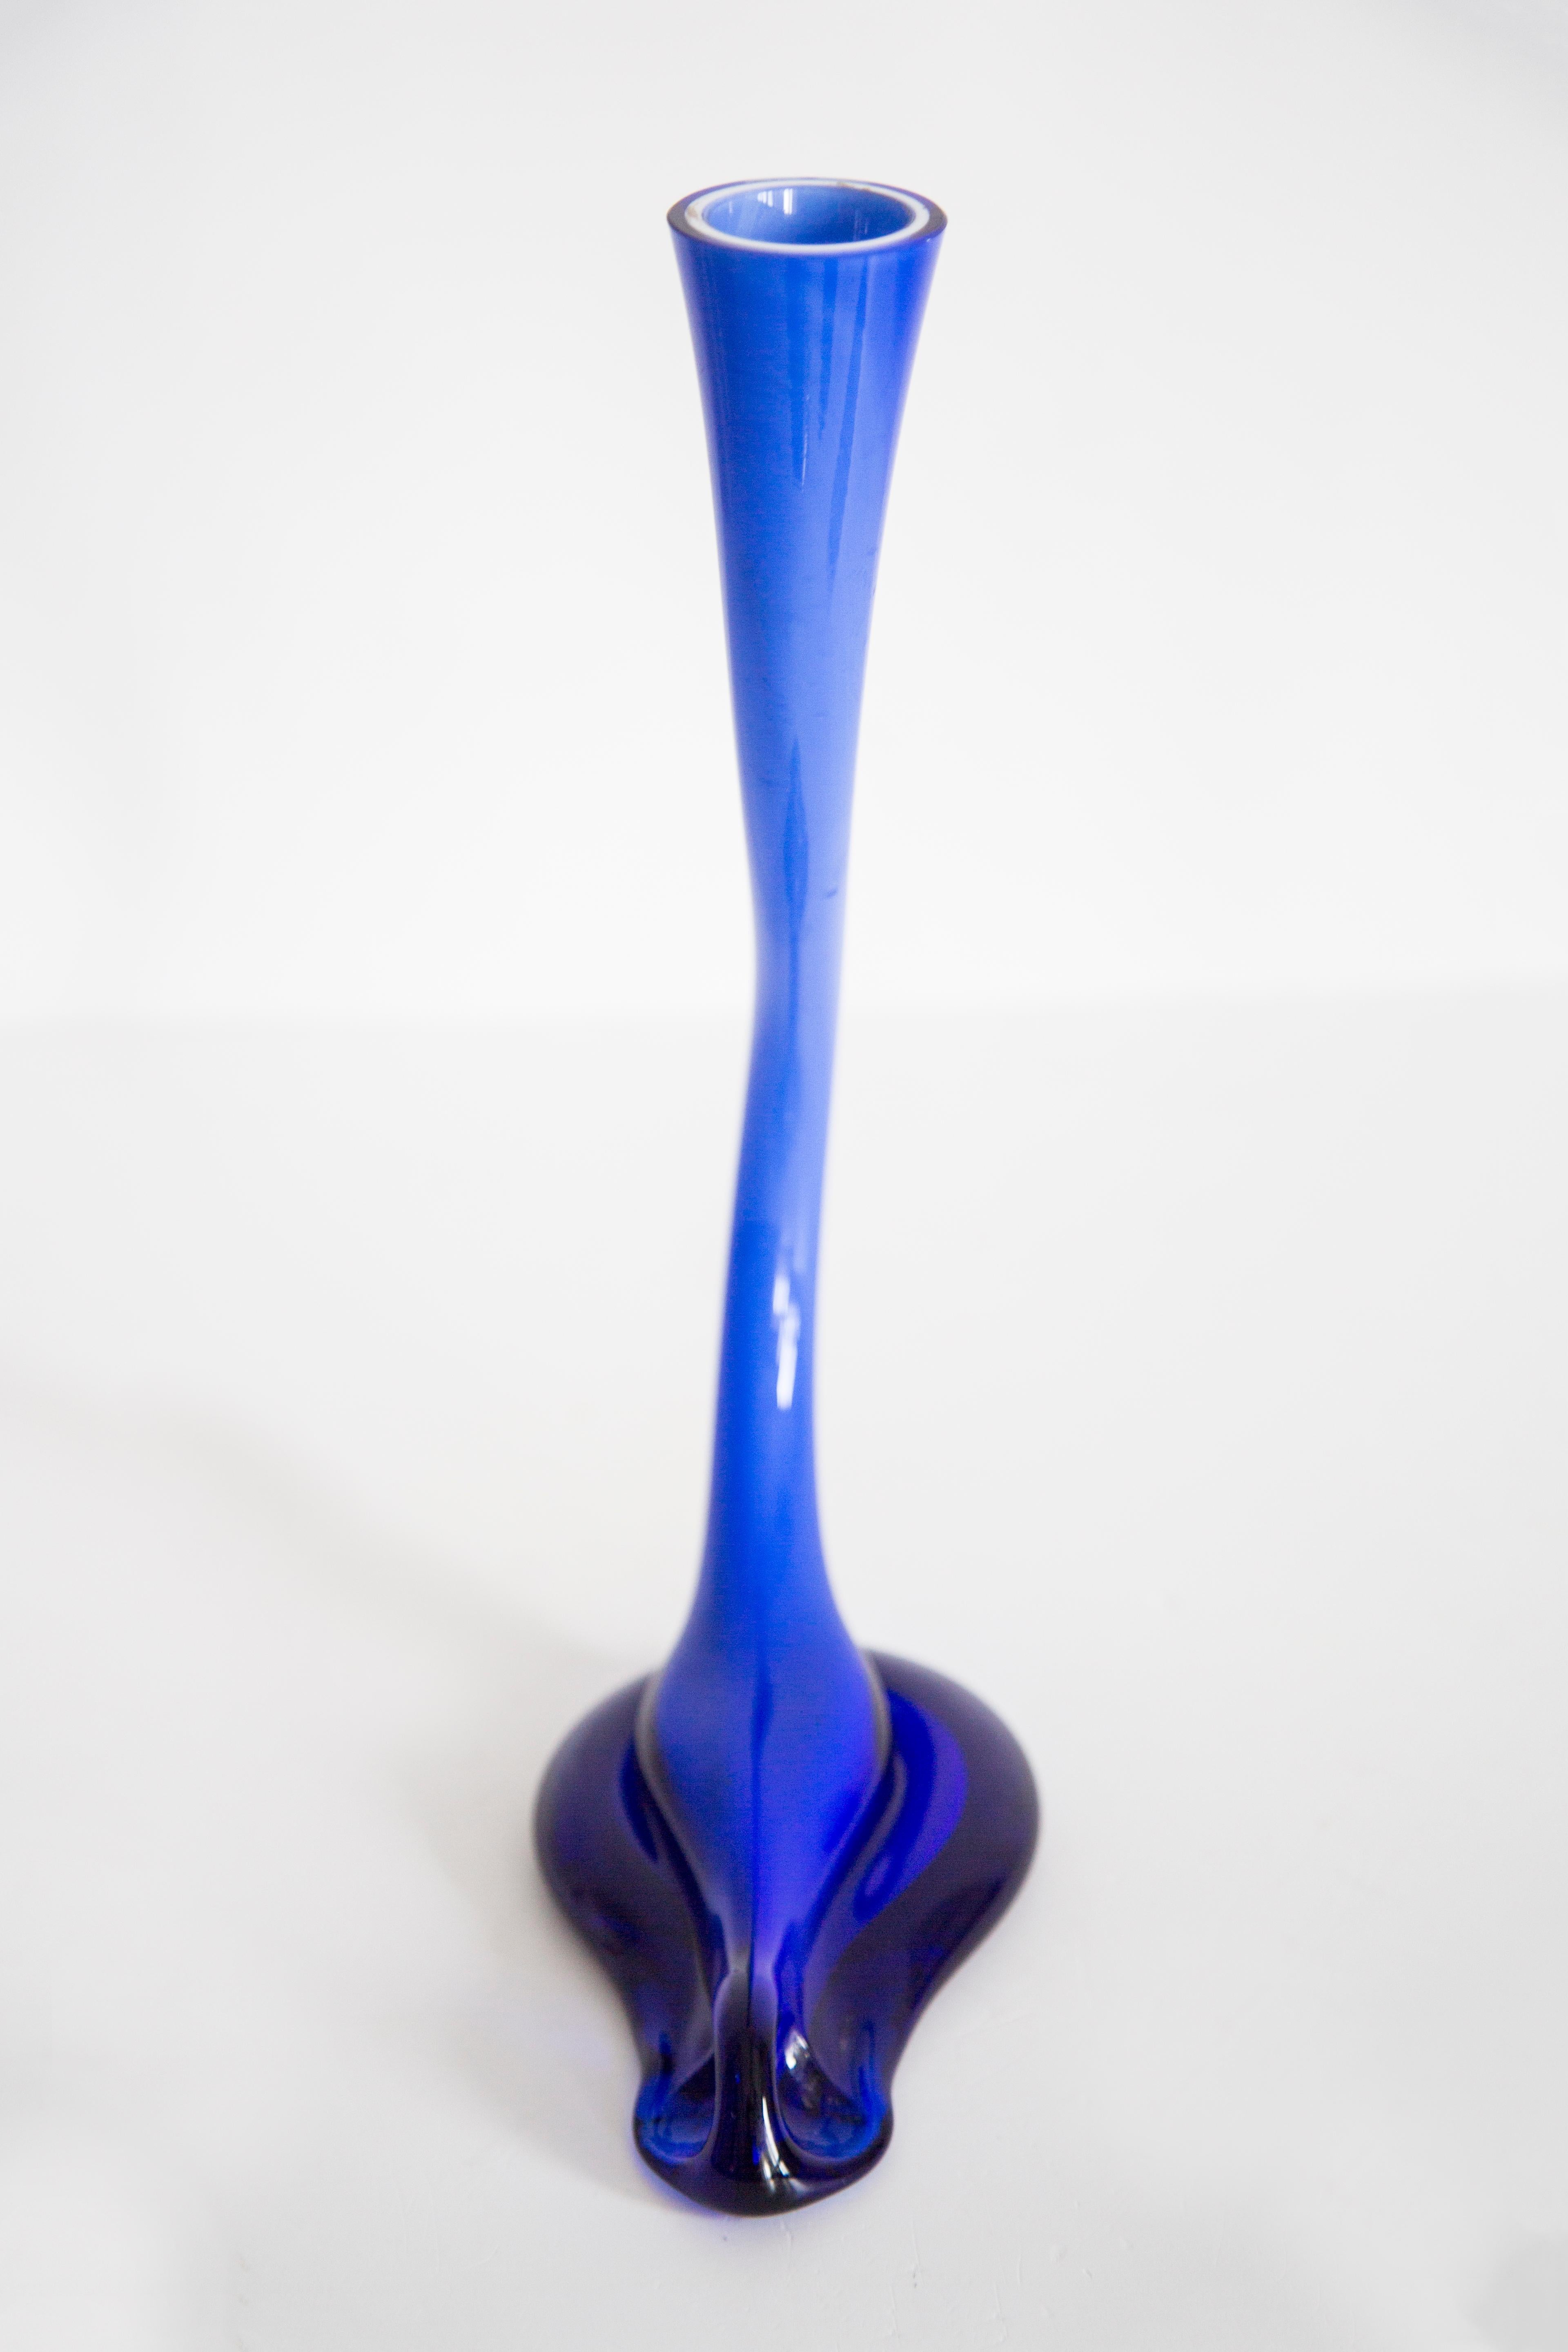 Mid Century Blue Artistic Twisted Vase, Europe, 1960s For Sale 2